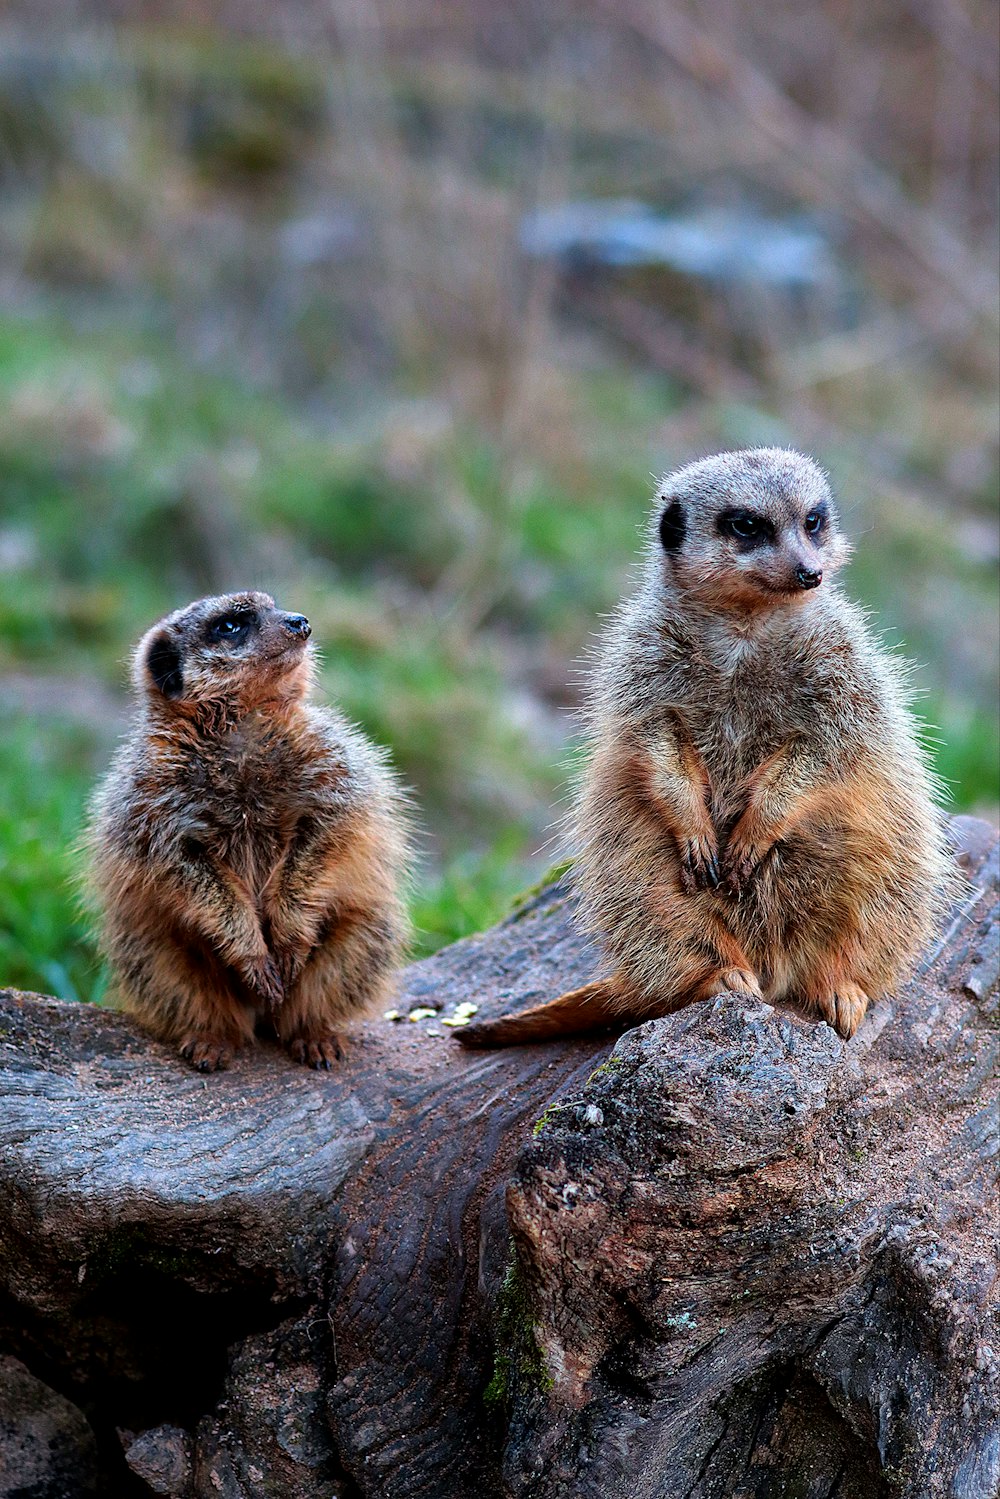 two meerkats are sitting on a log